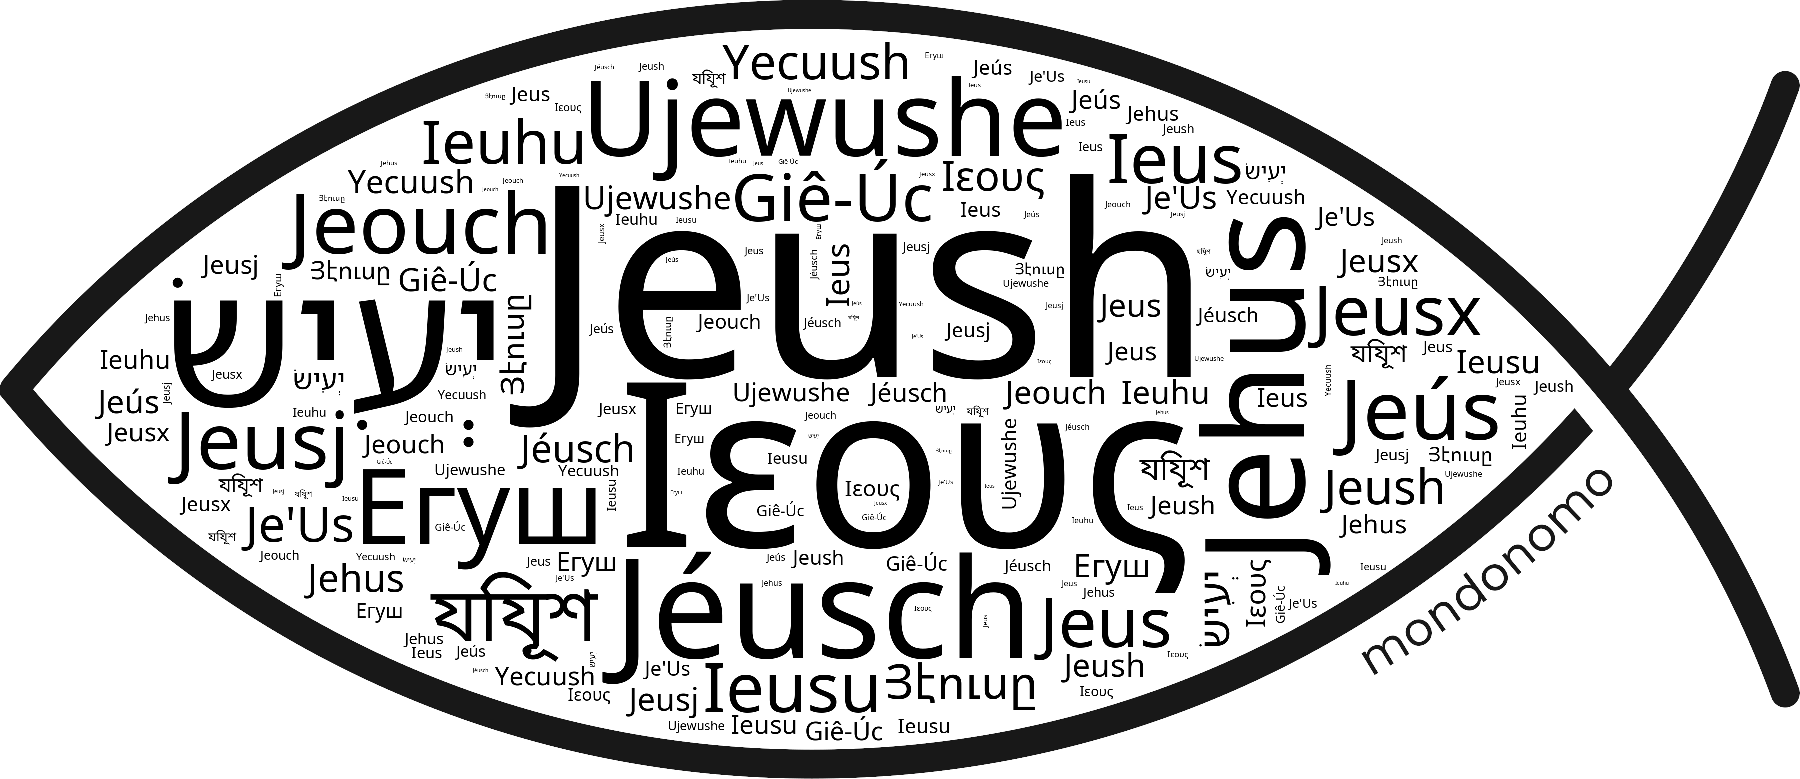 Name Jeush in the world's Bibles